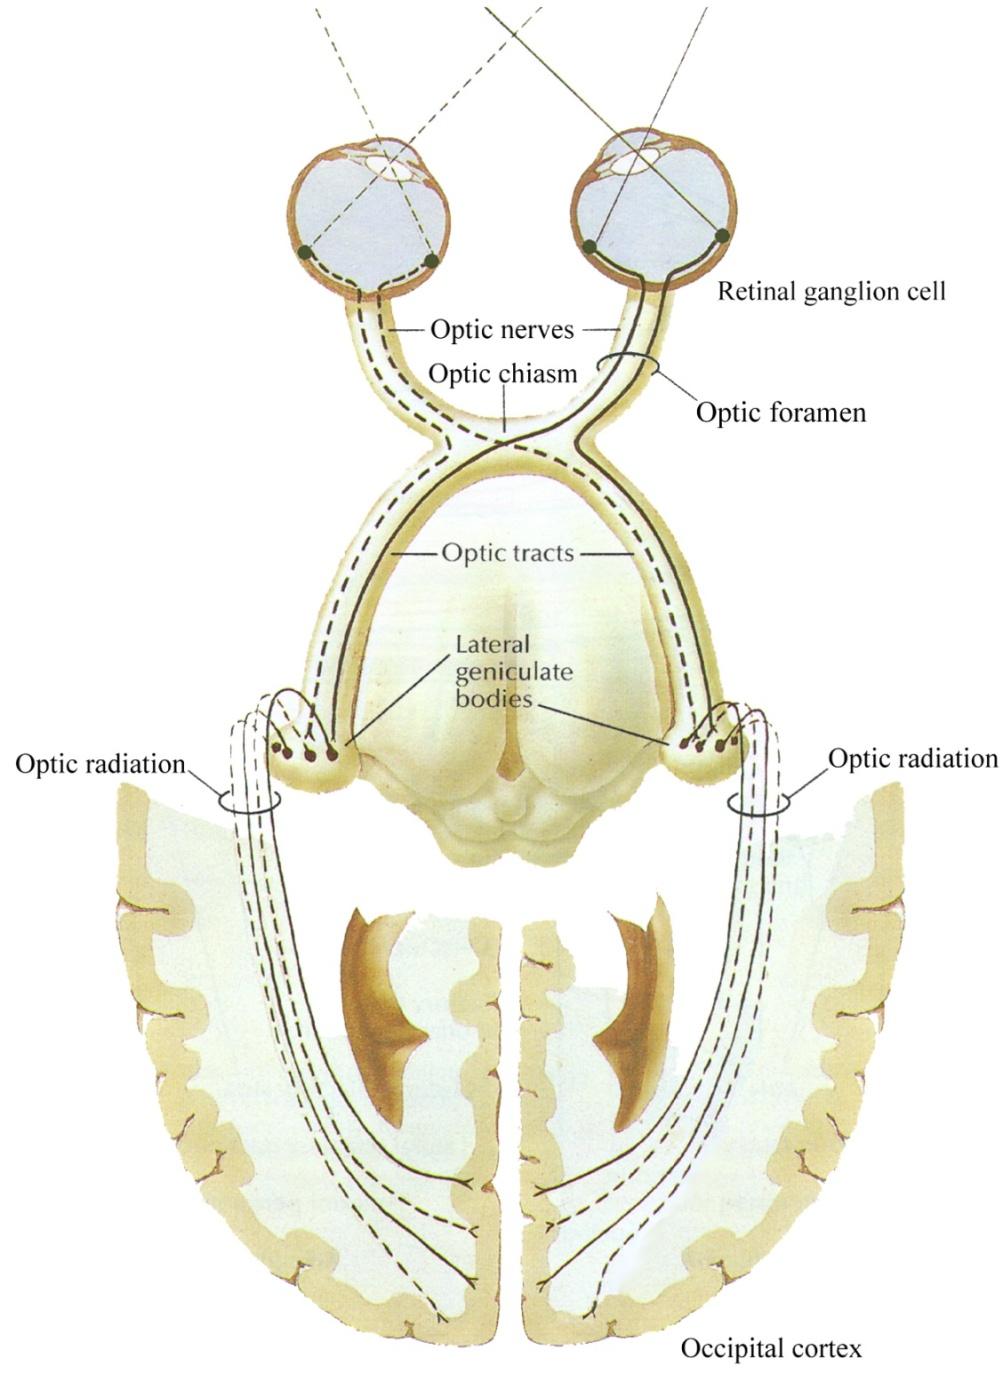 Optic Nerve (CN II) Optic nerves are the axons of retinal ganglion cells inside the eye. The optic nerve is really a tract (CNS).